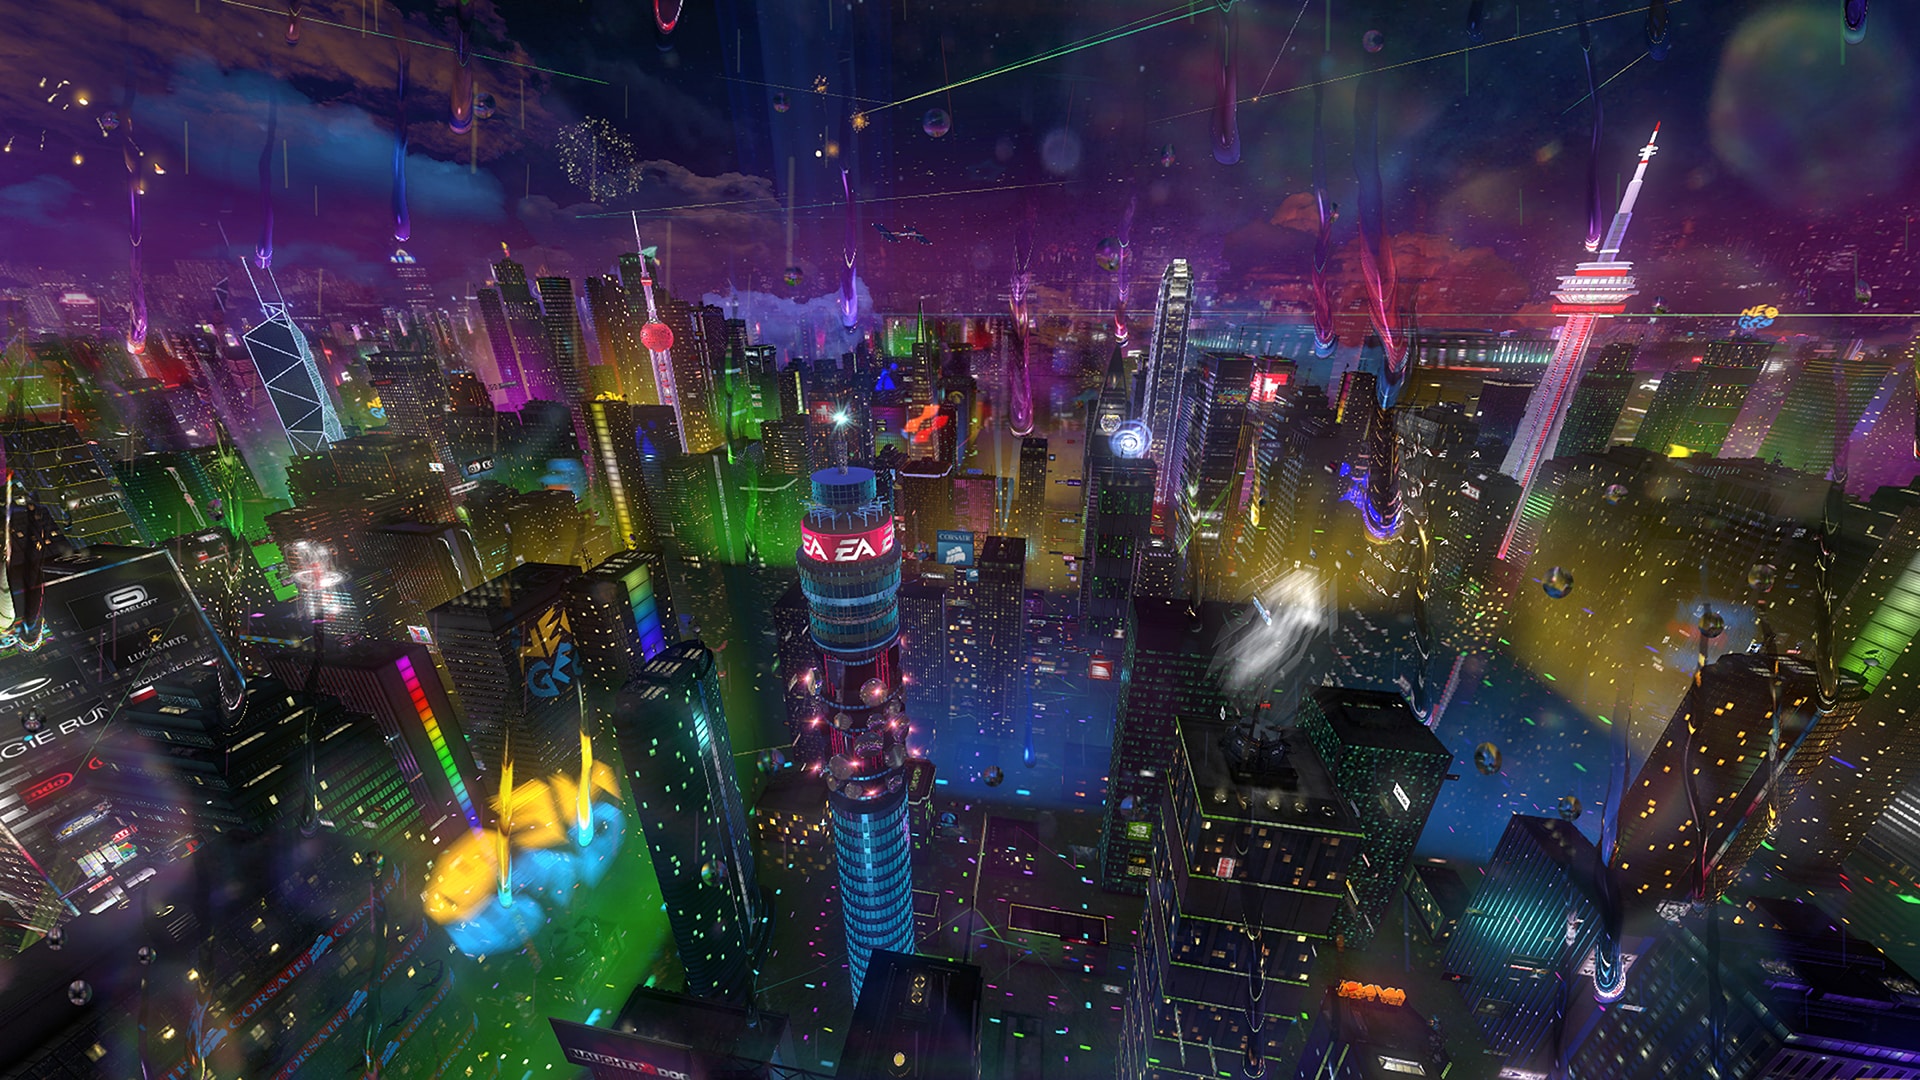 Screen capture of video animation showing a futuristic cityscape